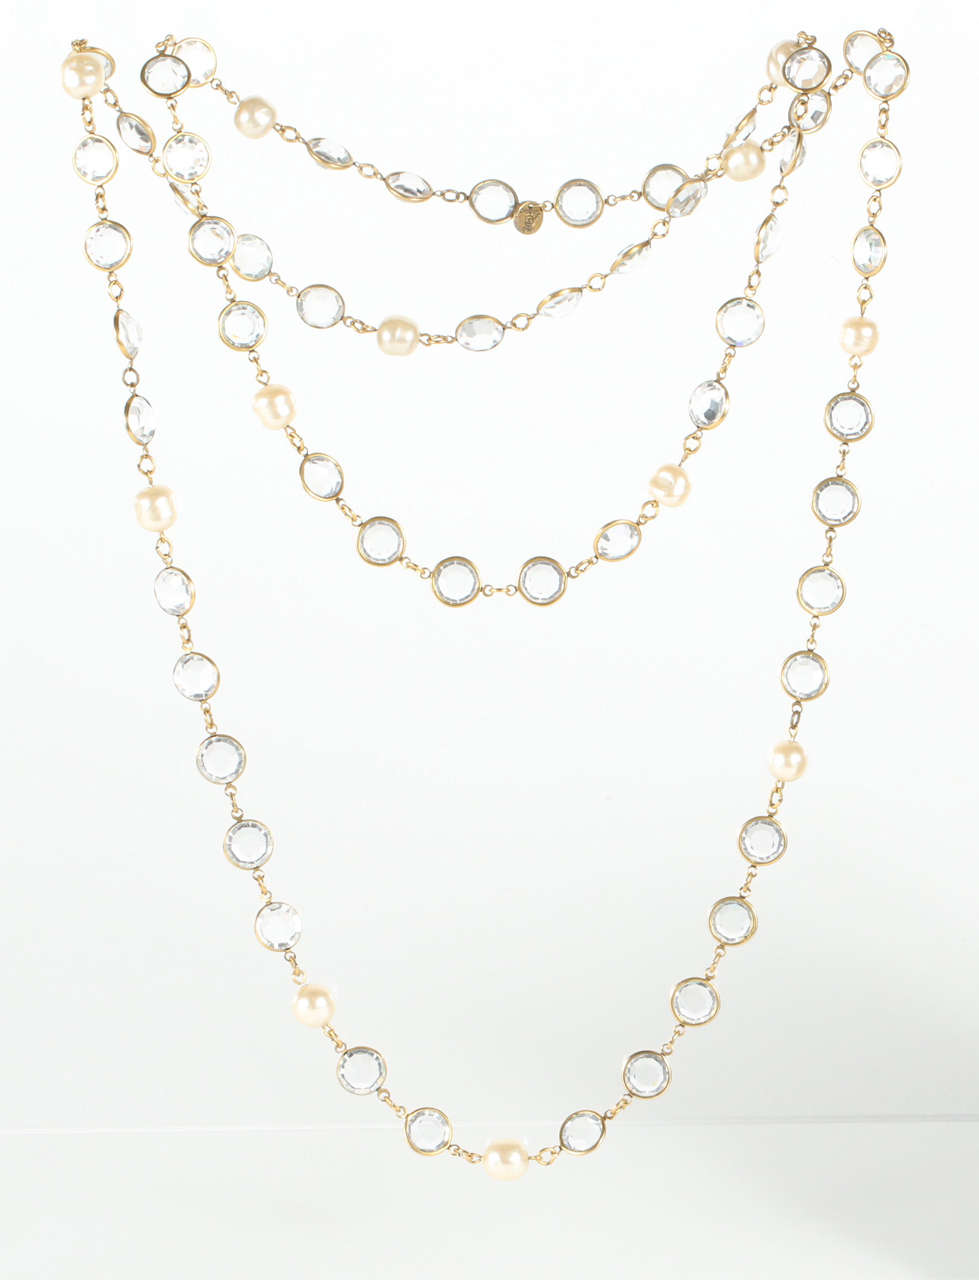 A sparkling faceted crystal and irregular glass pearl sautoir by Chanel. Features the 